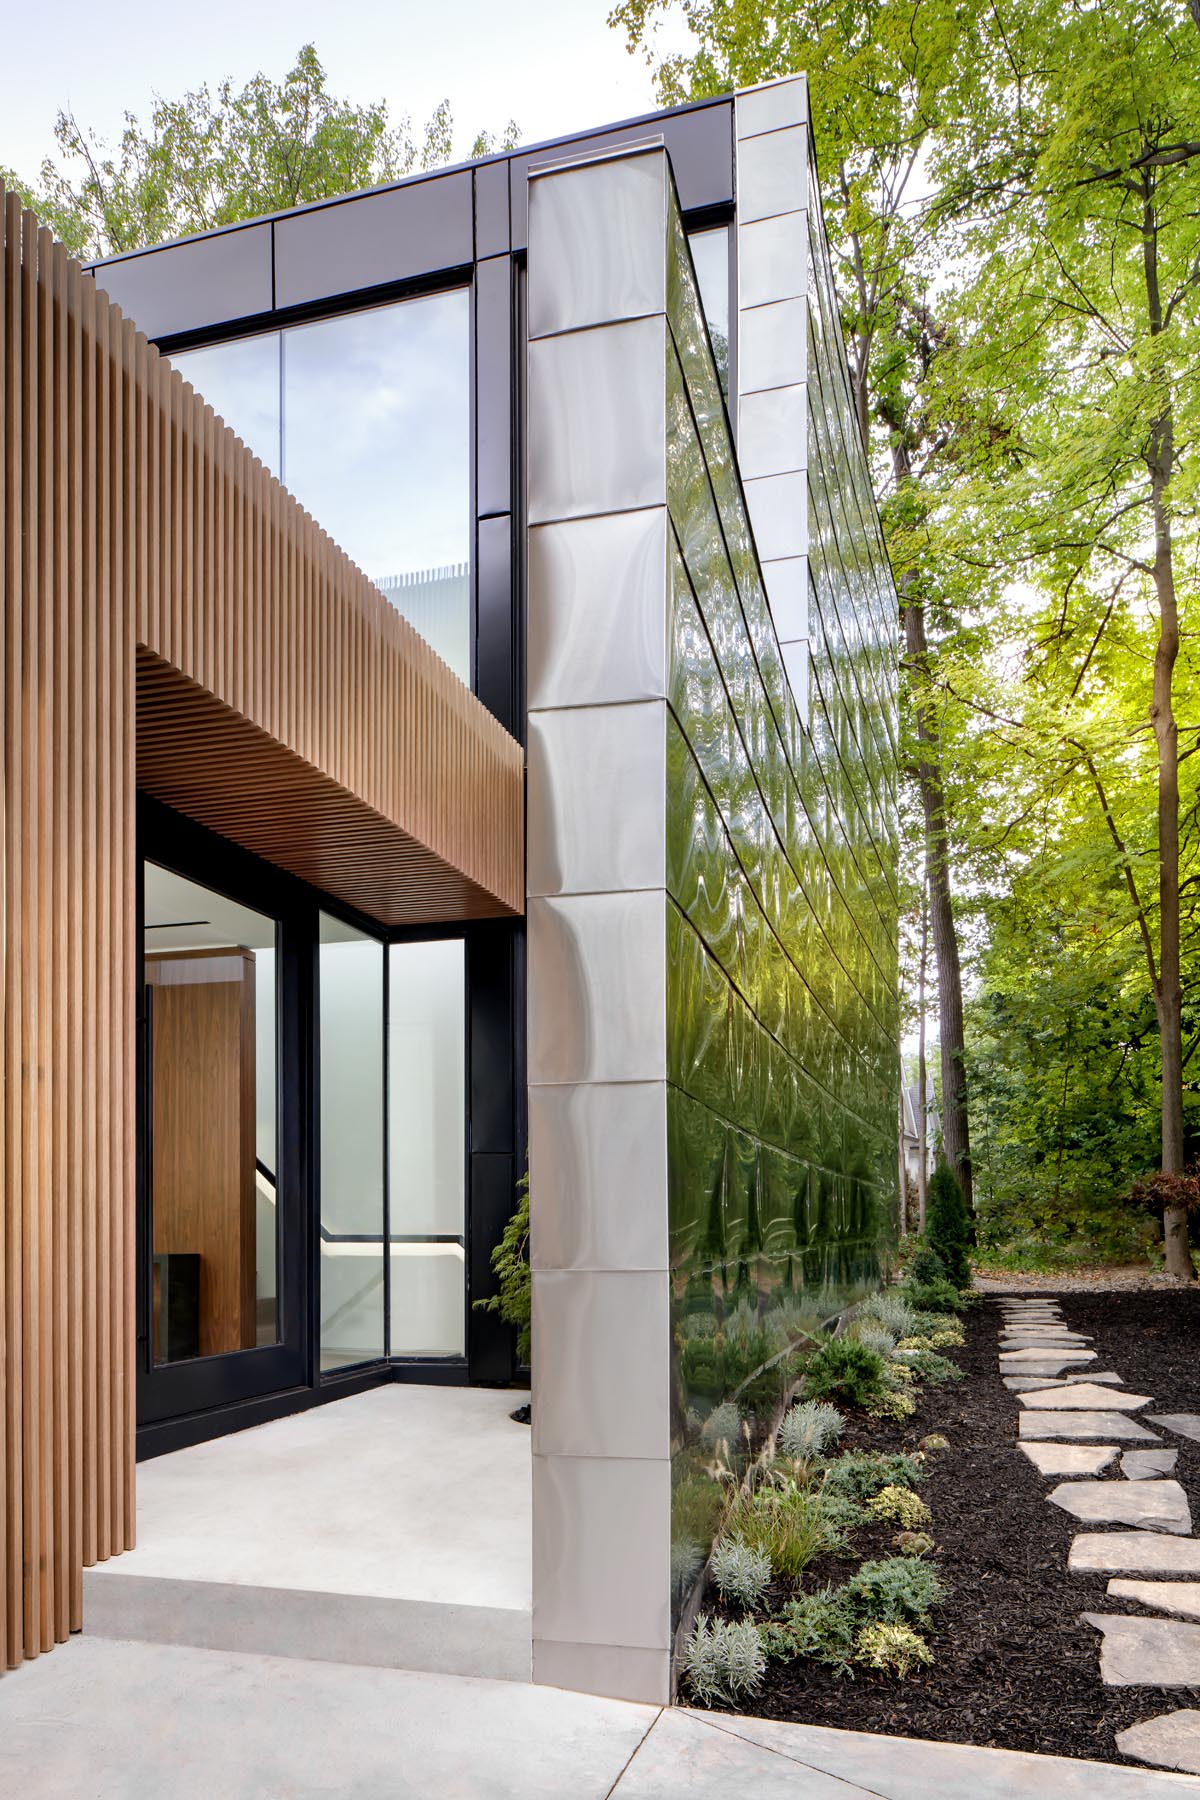 The design of this modern house includes a solid front facade, with a tucked away entryway, that afforded the client the privacy they desired.